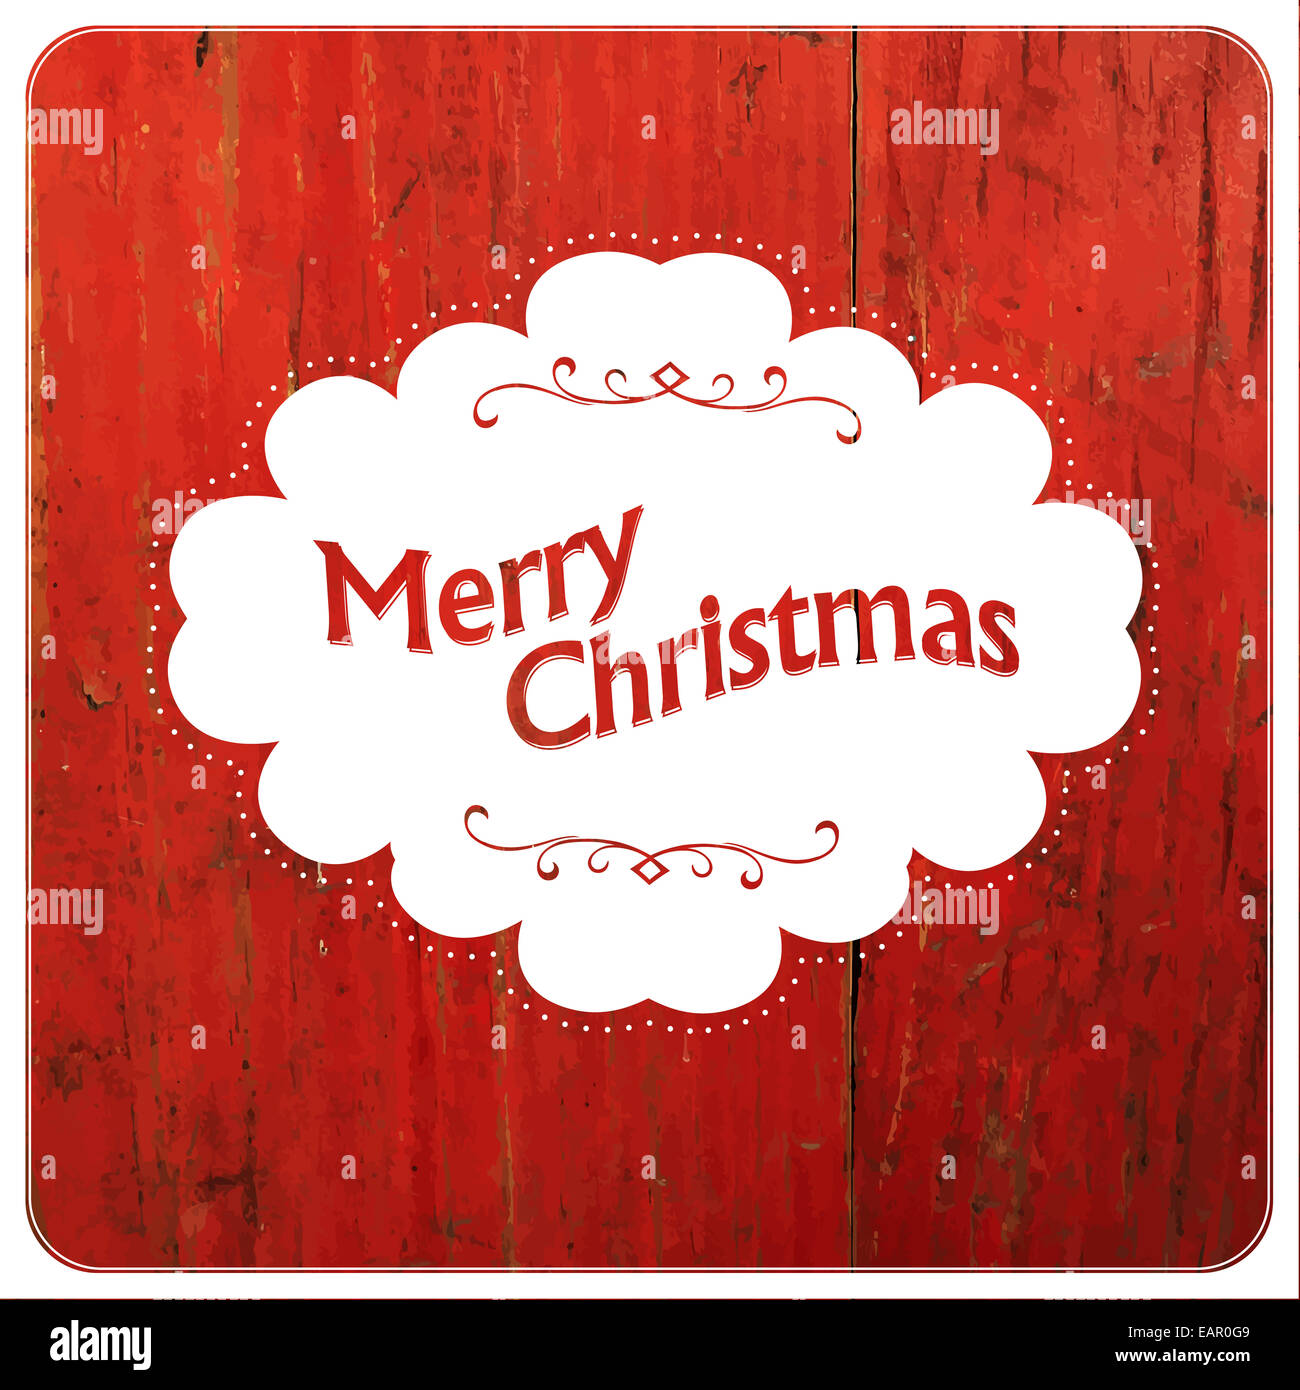 Merry Christmas VIntage Design On Red Planks. Vector Stock Photo